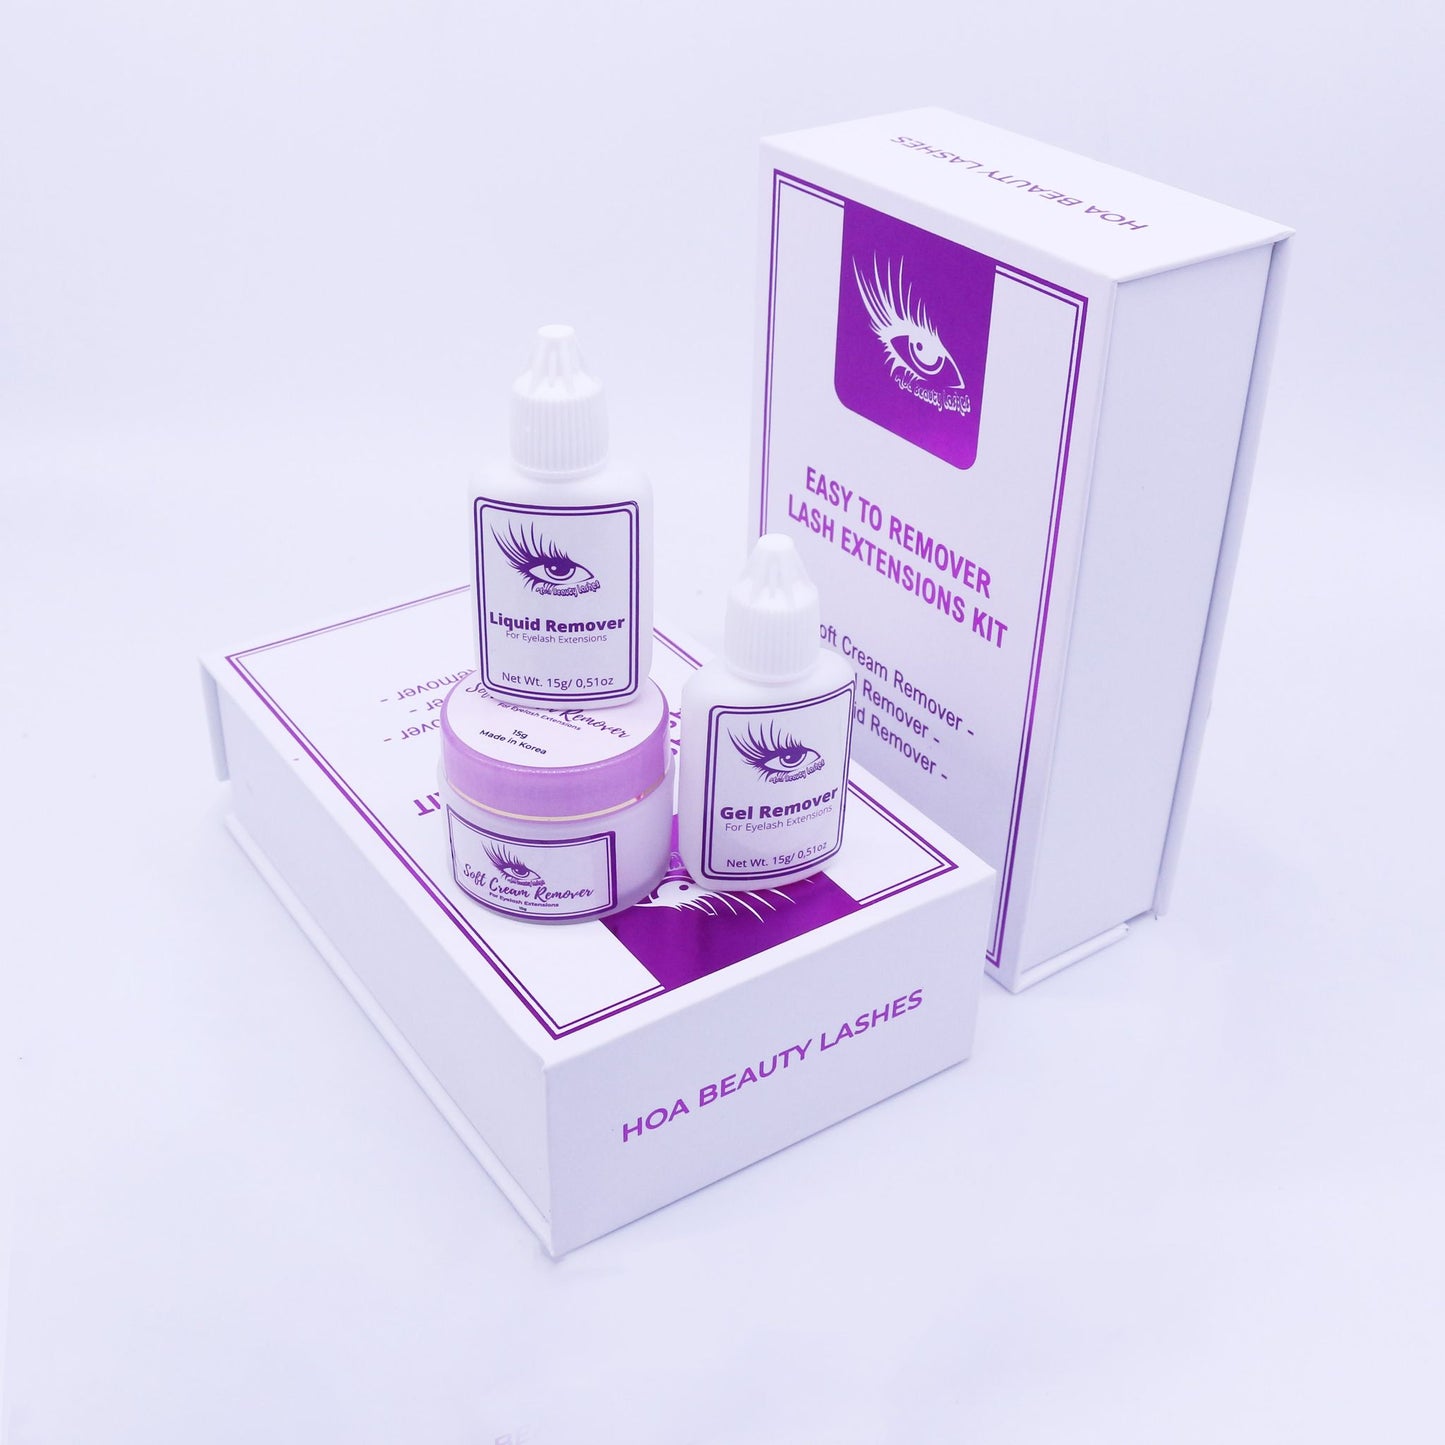 Hoabeautylashes - Remover Kit